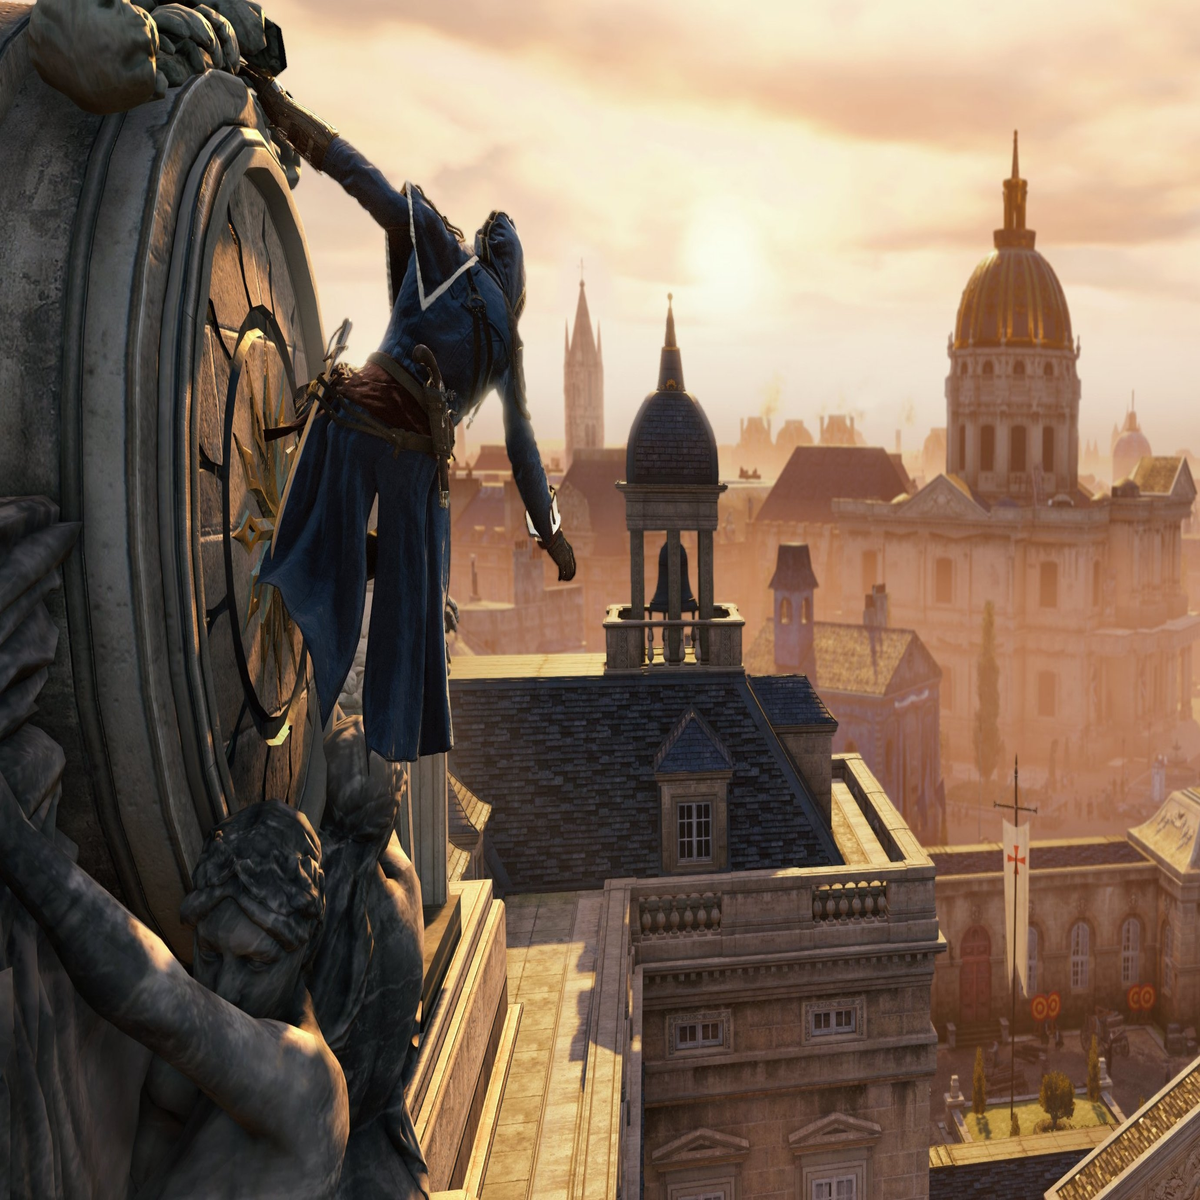  Assassin's Creed - The Definitive Visual History